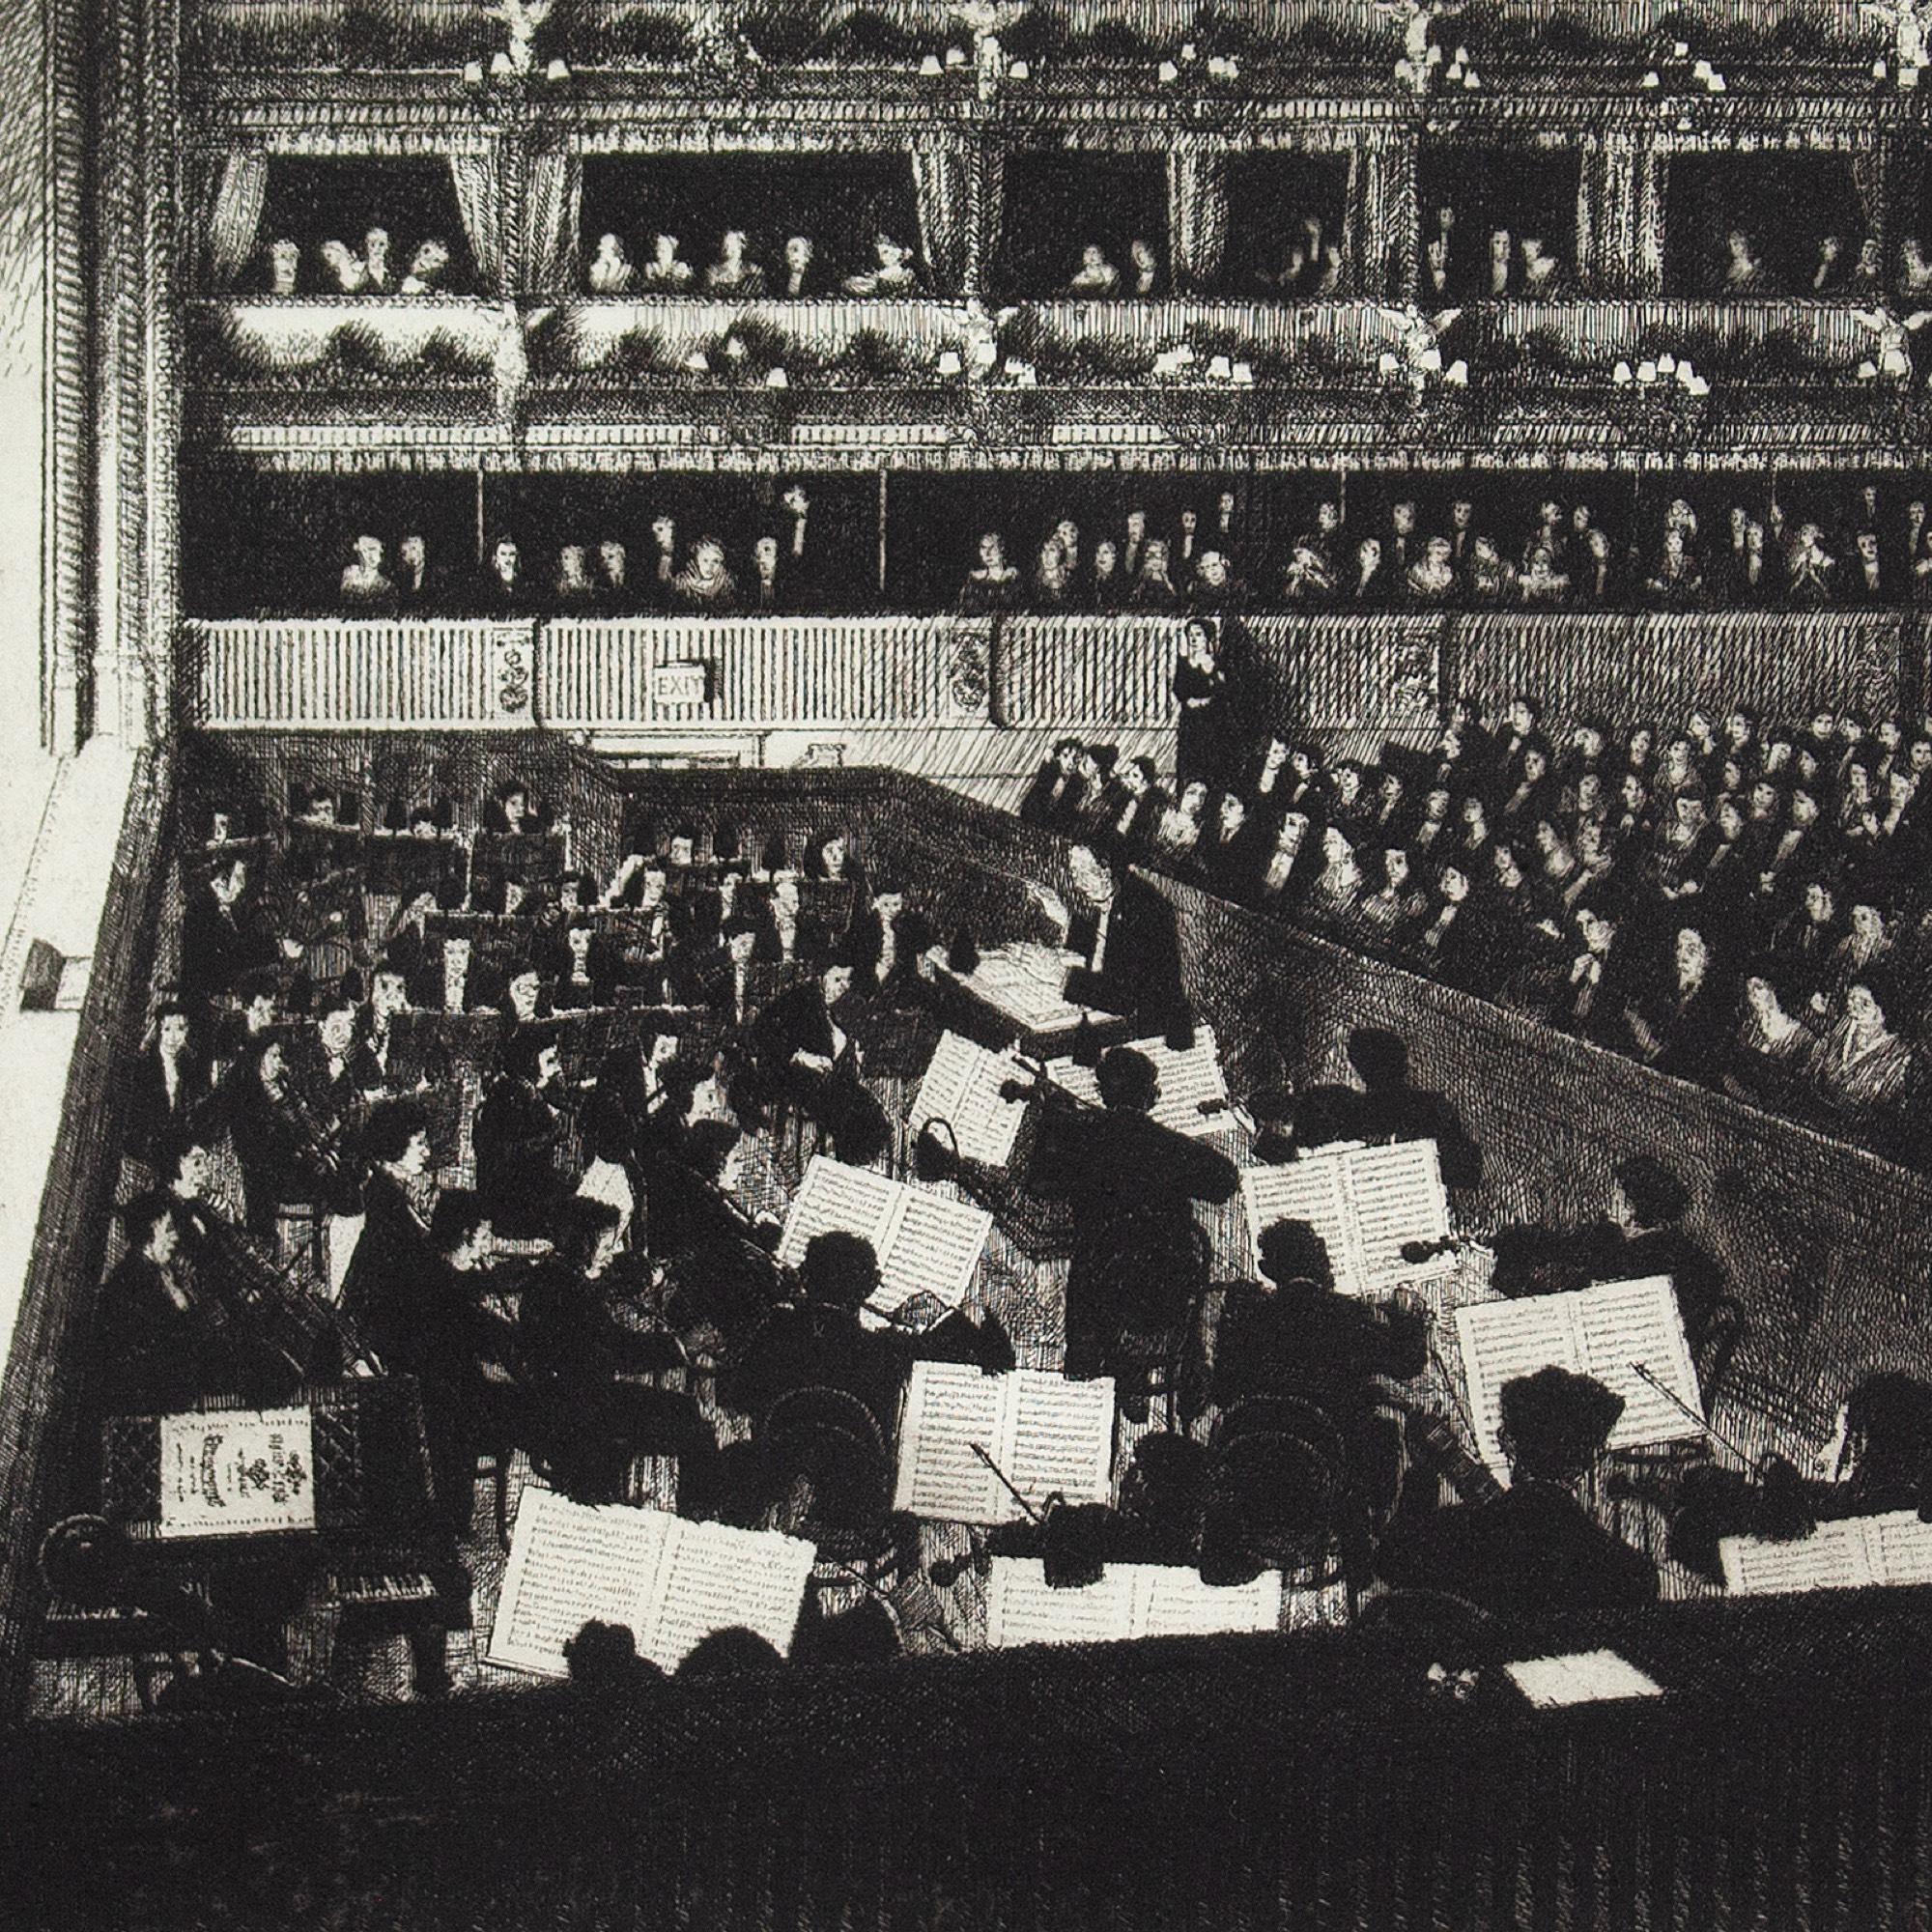 Wilfred Fairclough, Orchestra At The Royal Opera House, Etching 1